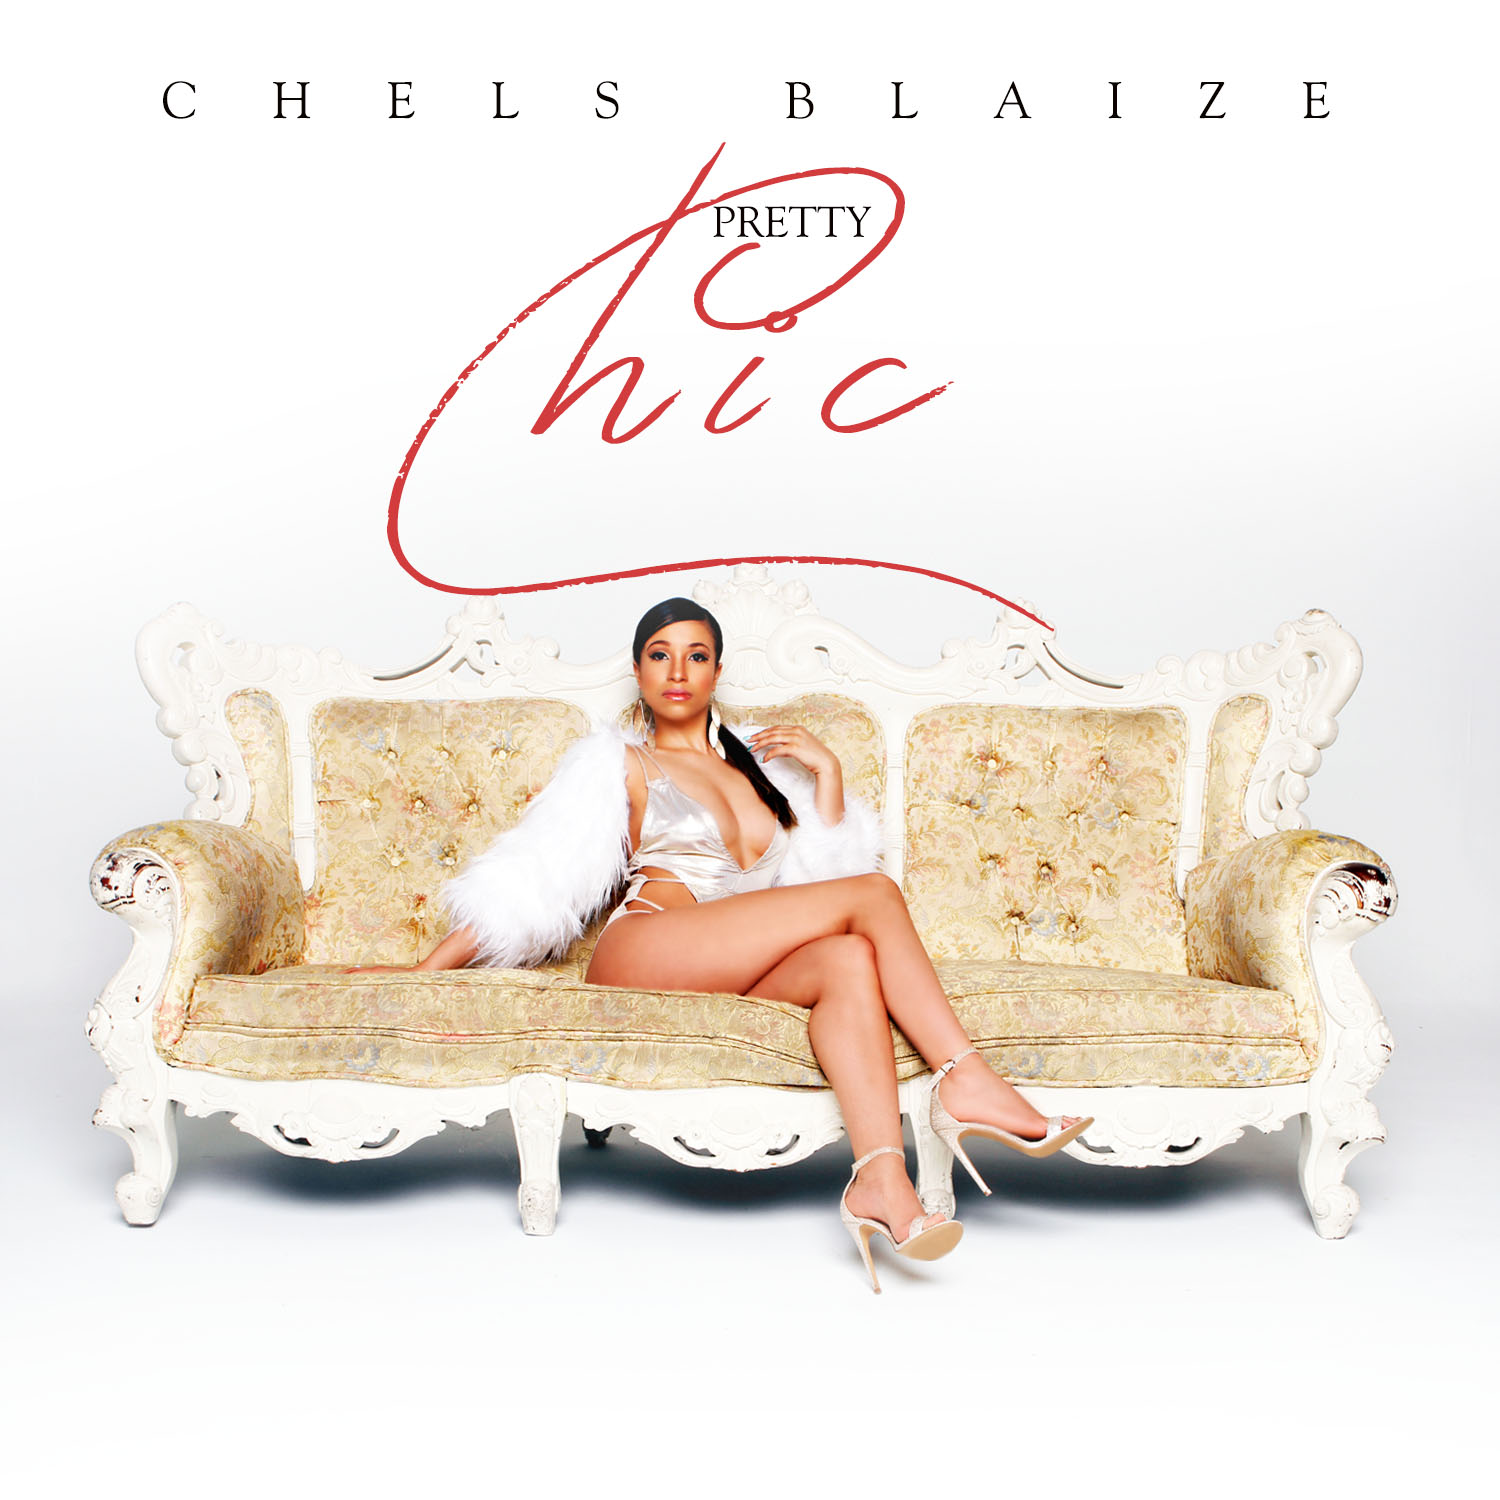 Chels Blaize declares her boss role in the release of her Official Video “Pretty Chic” @chelsblaize